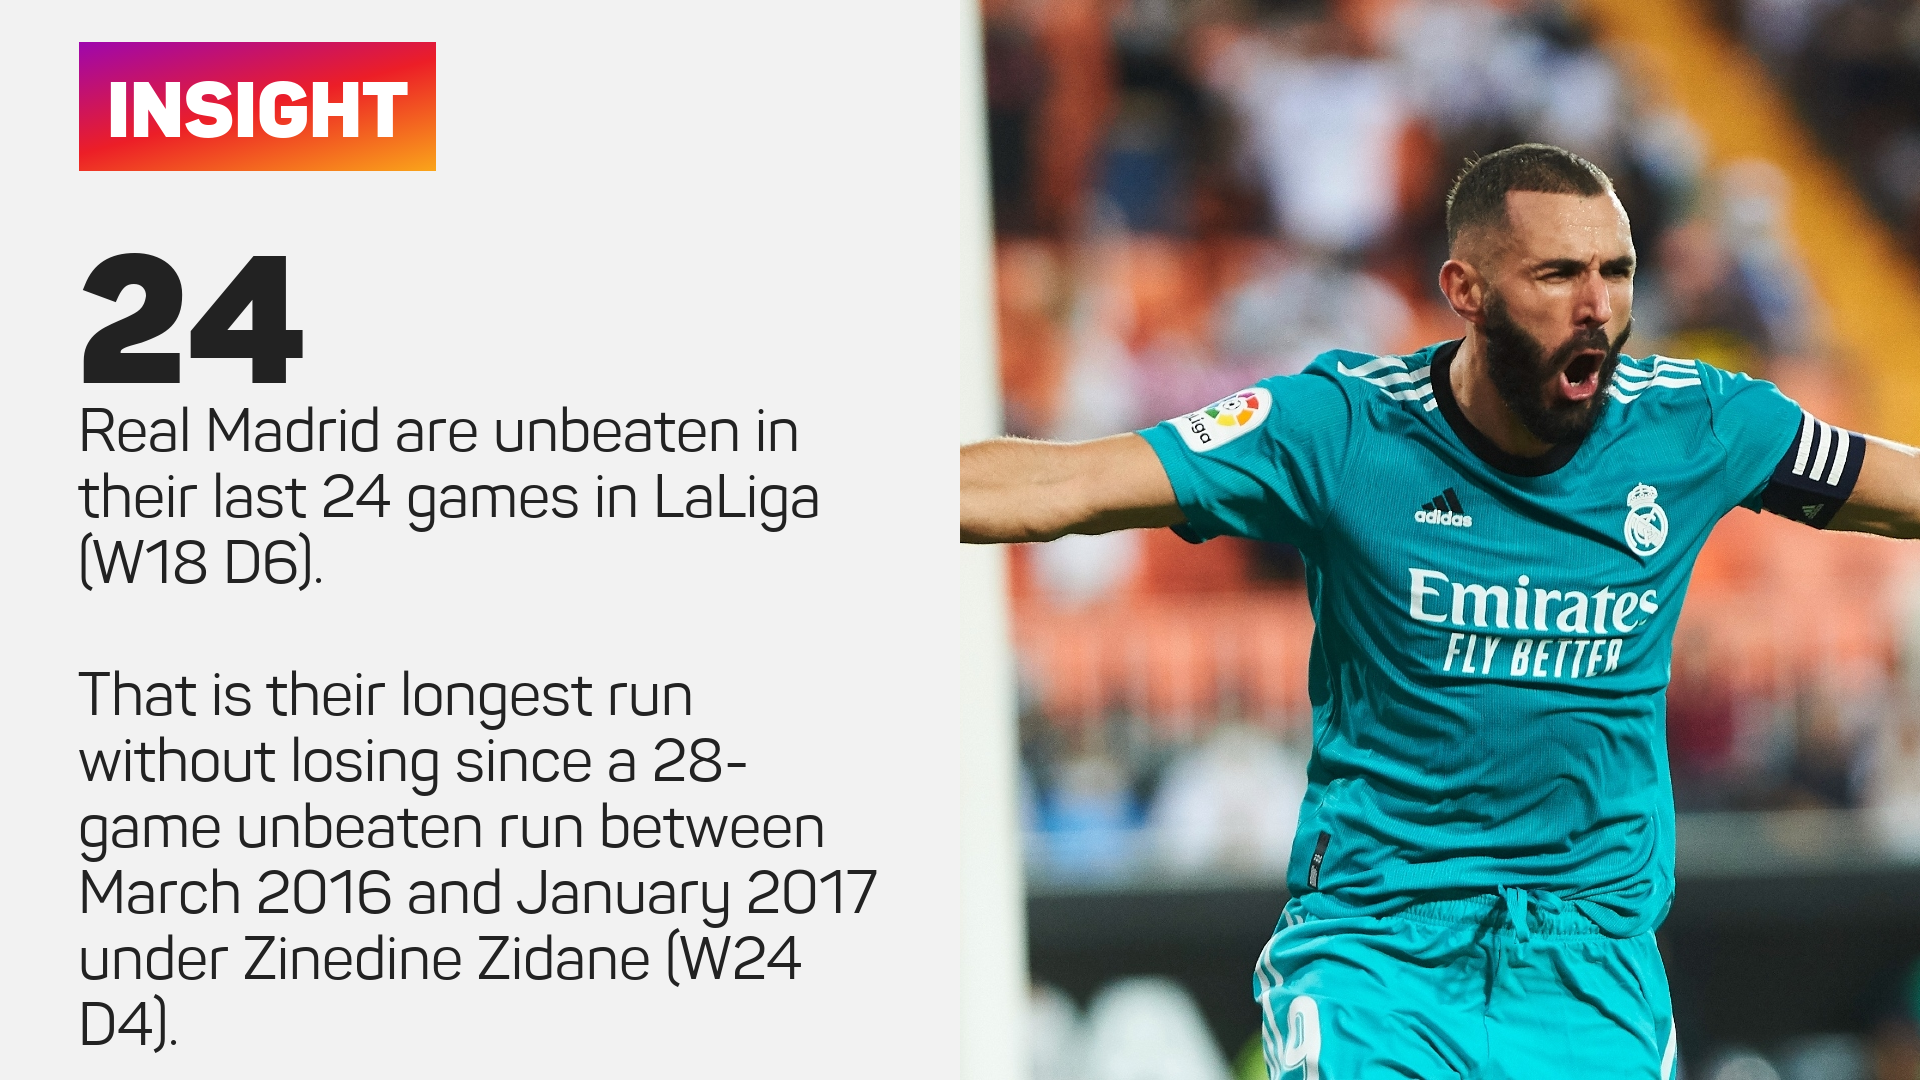 Real Madrid are unbeaten in 24 LaLiga matches